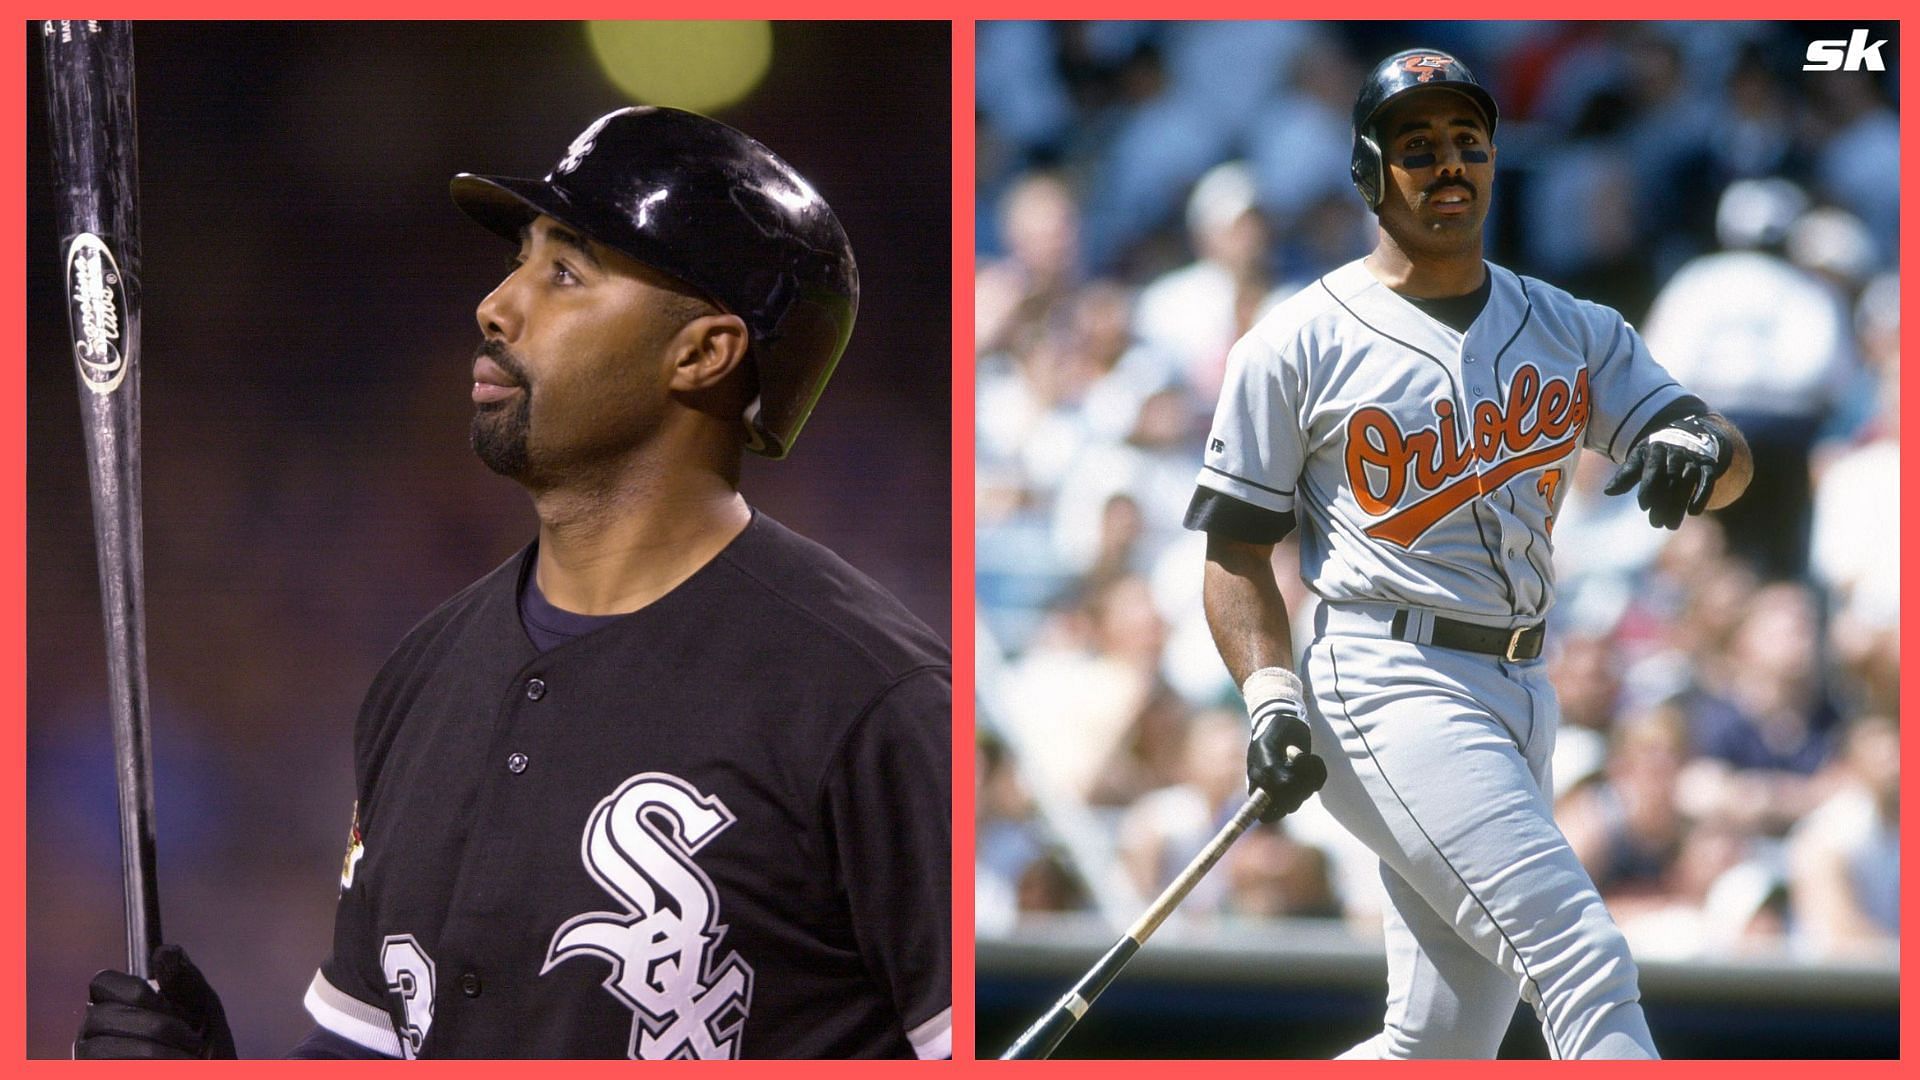 Who's the first player you think of - Chicago White Sox